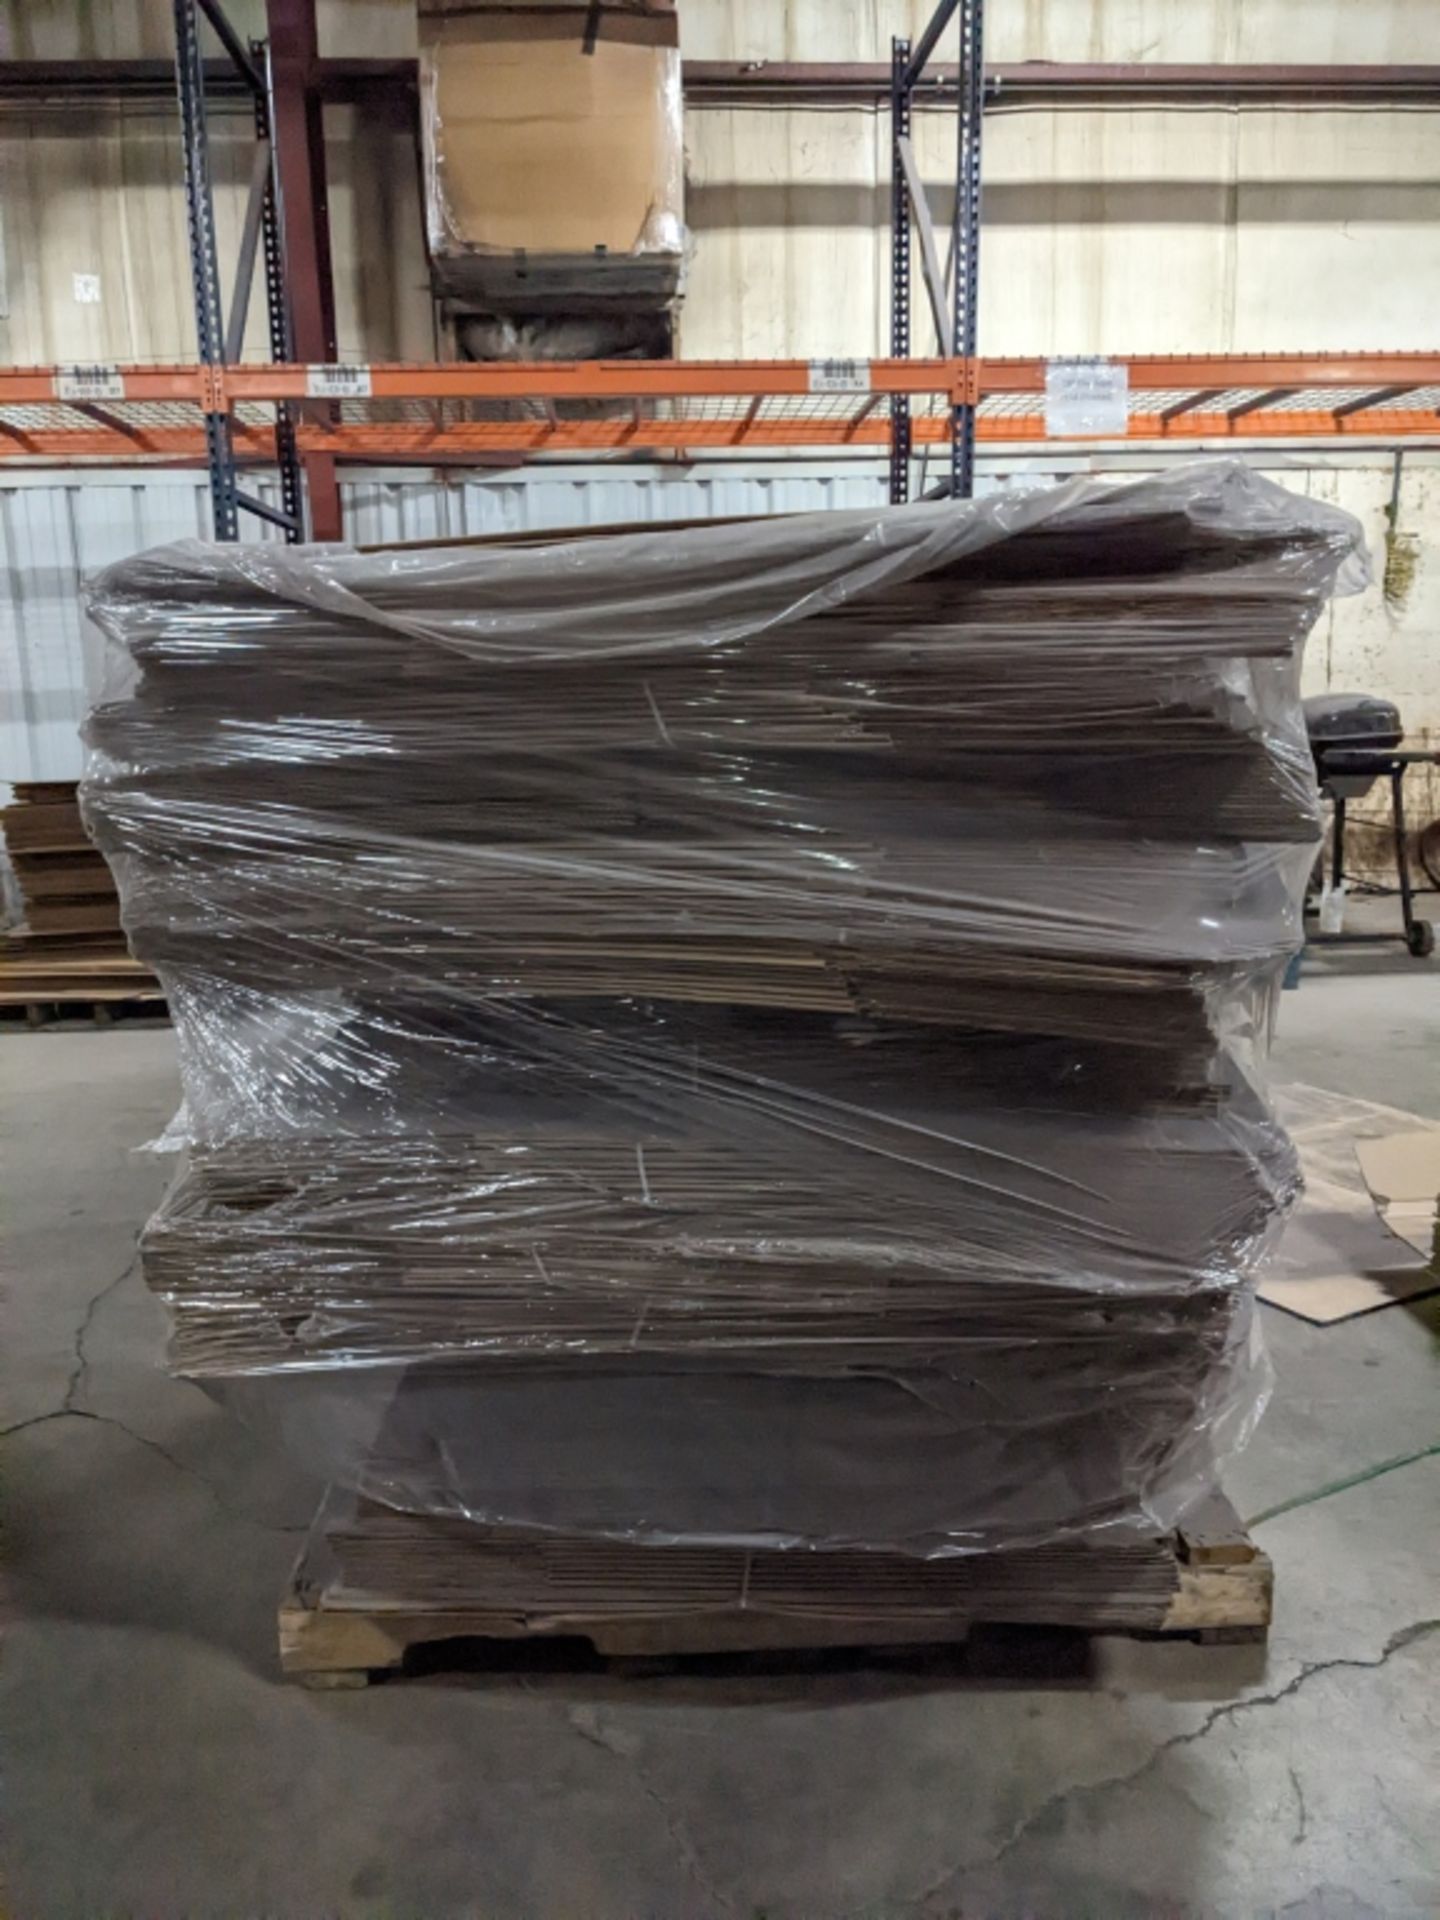 Pallet of Uline 25 x 25 x 20 Shipping Boxes. - Image 3 of 4